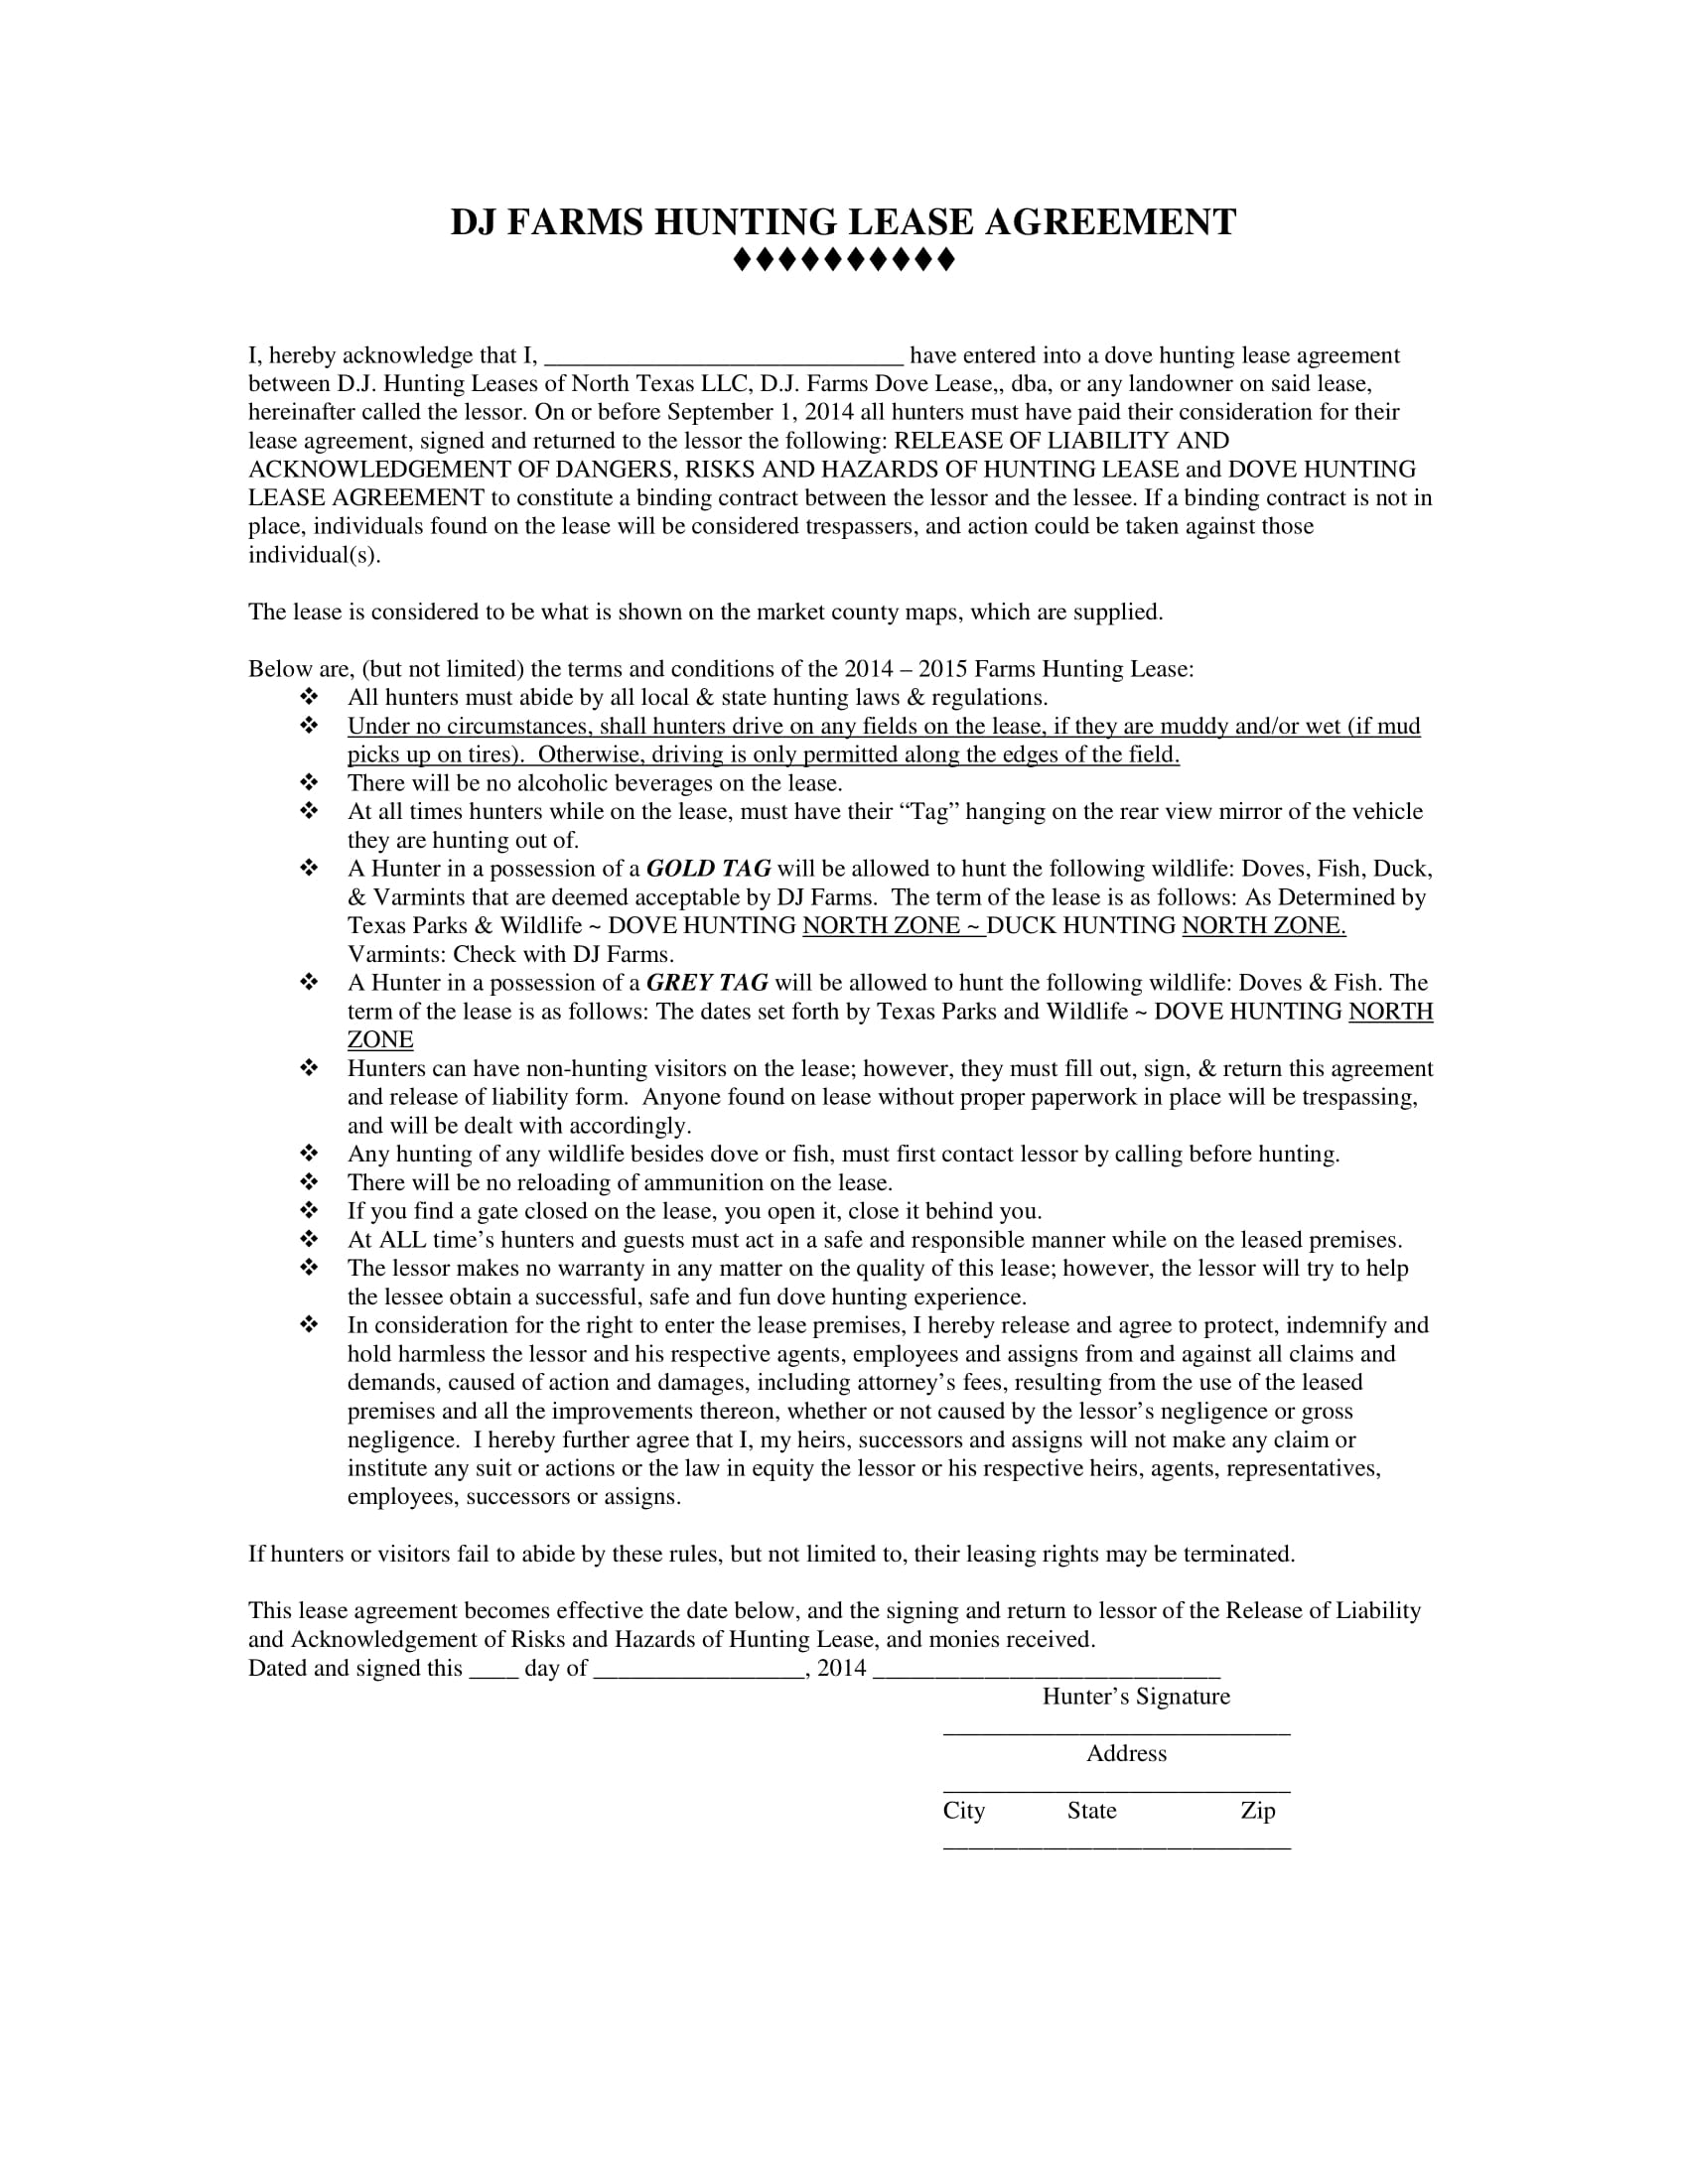 farm hunting lease agreement contract form 1